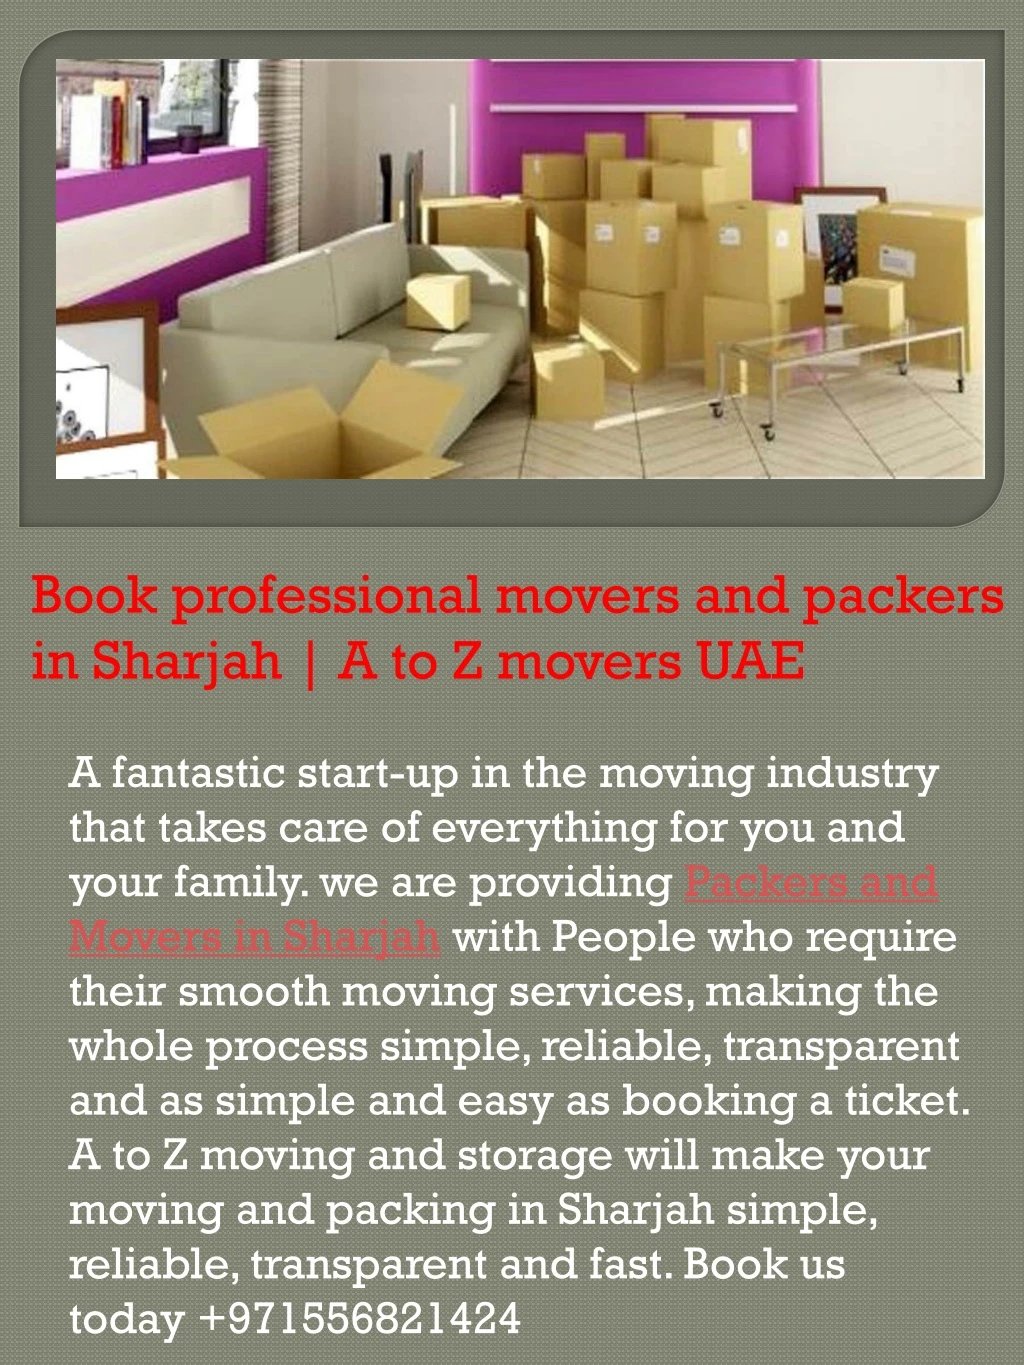 book professional movers and packers in sharjah